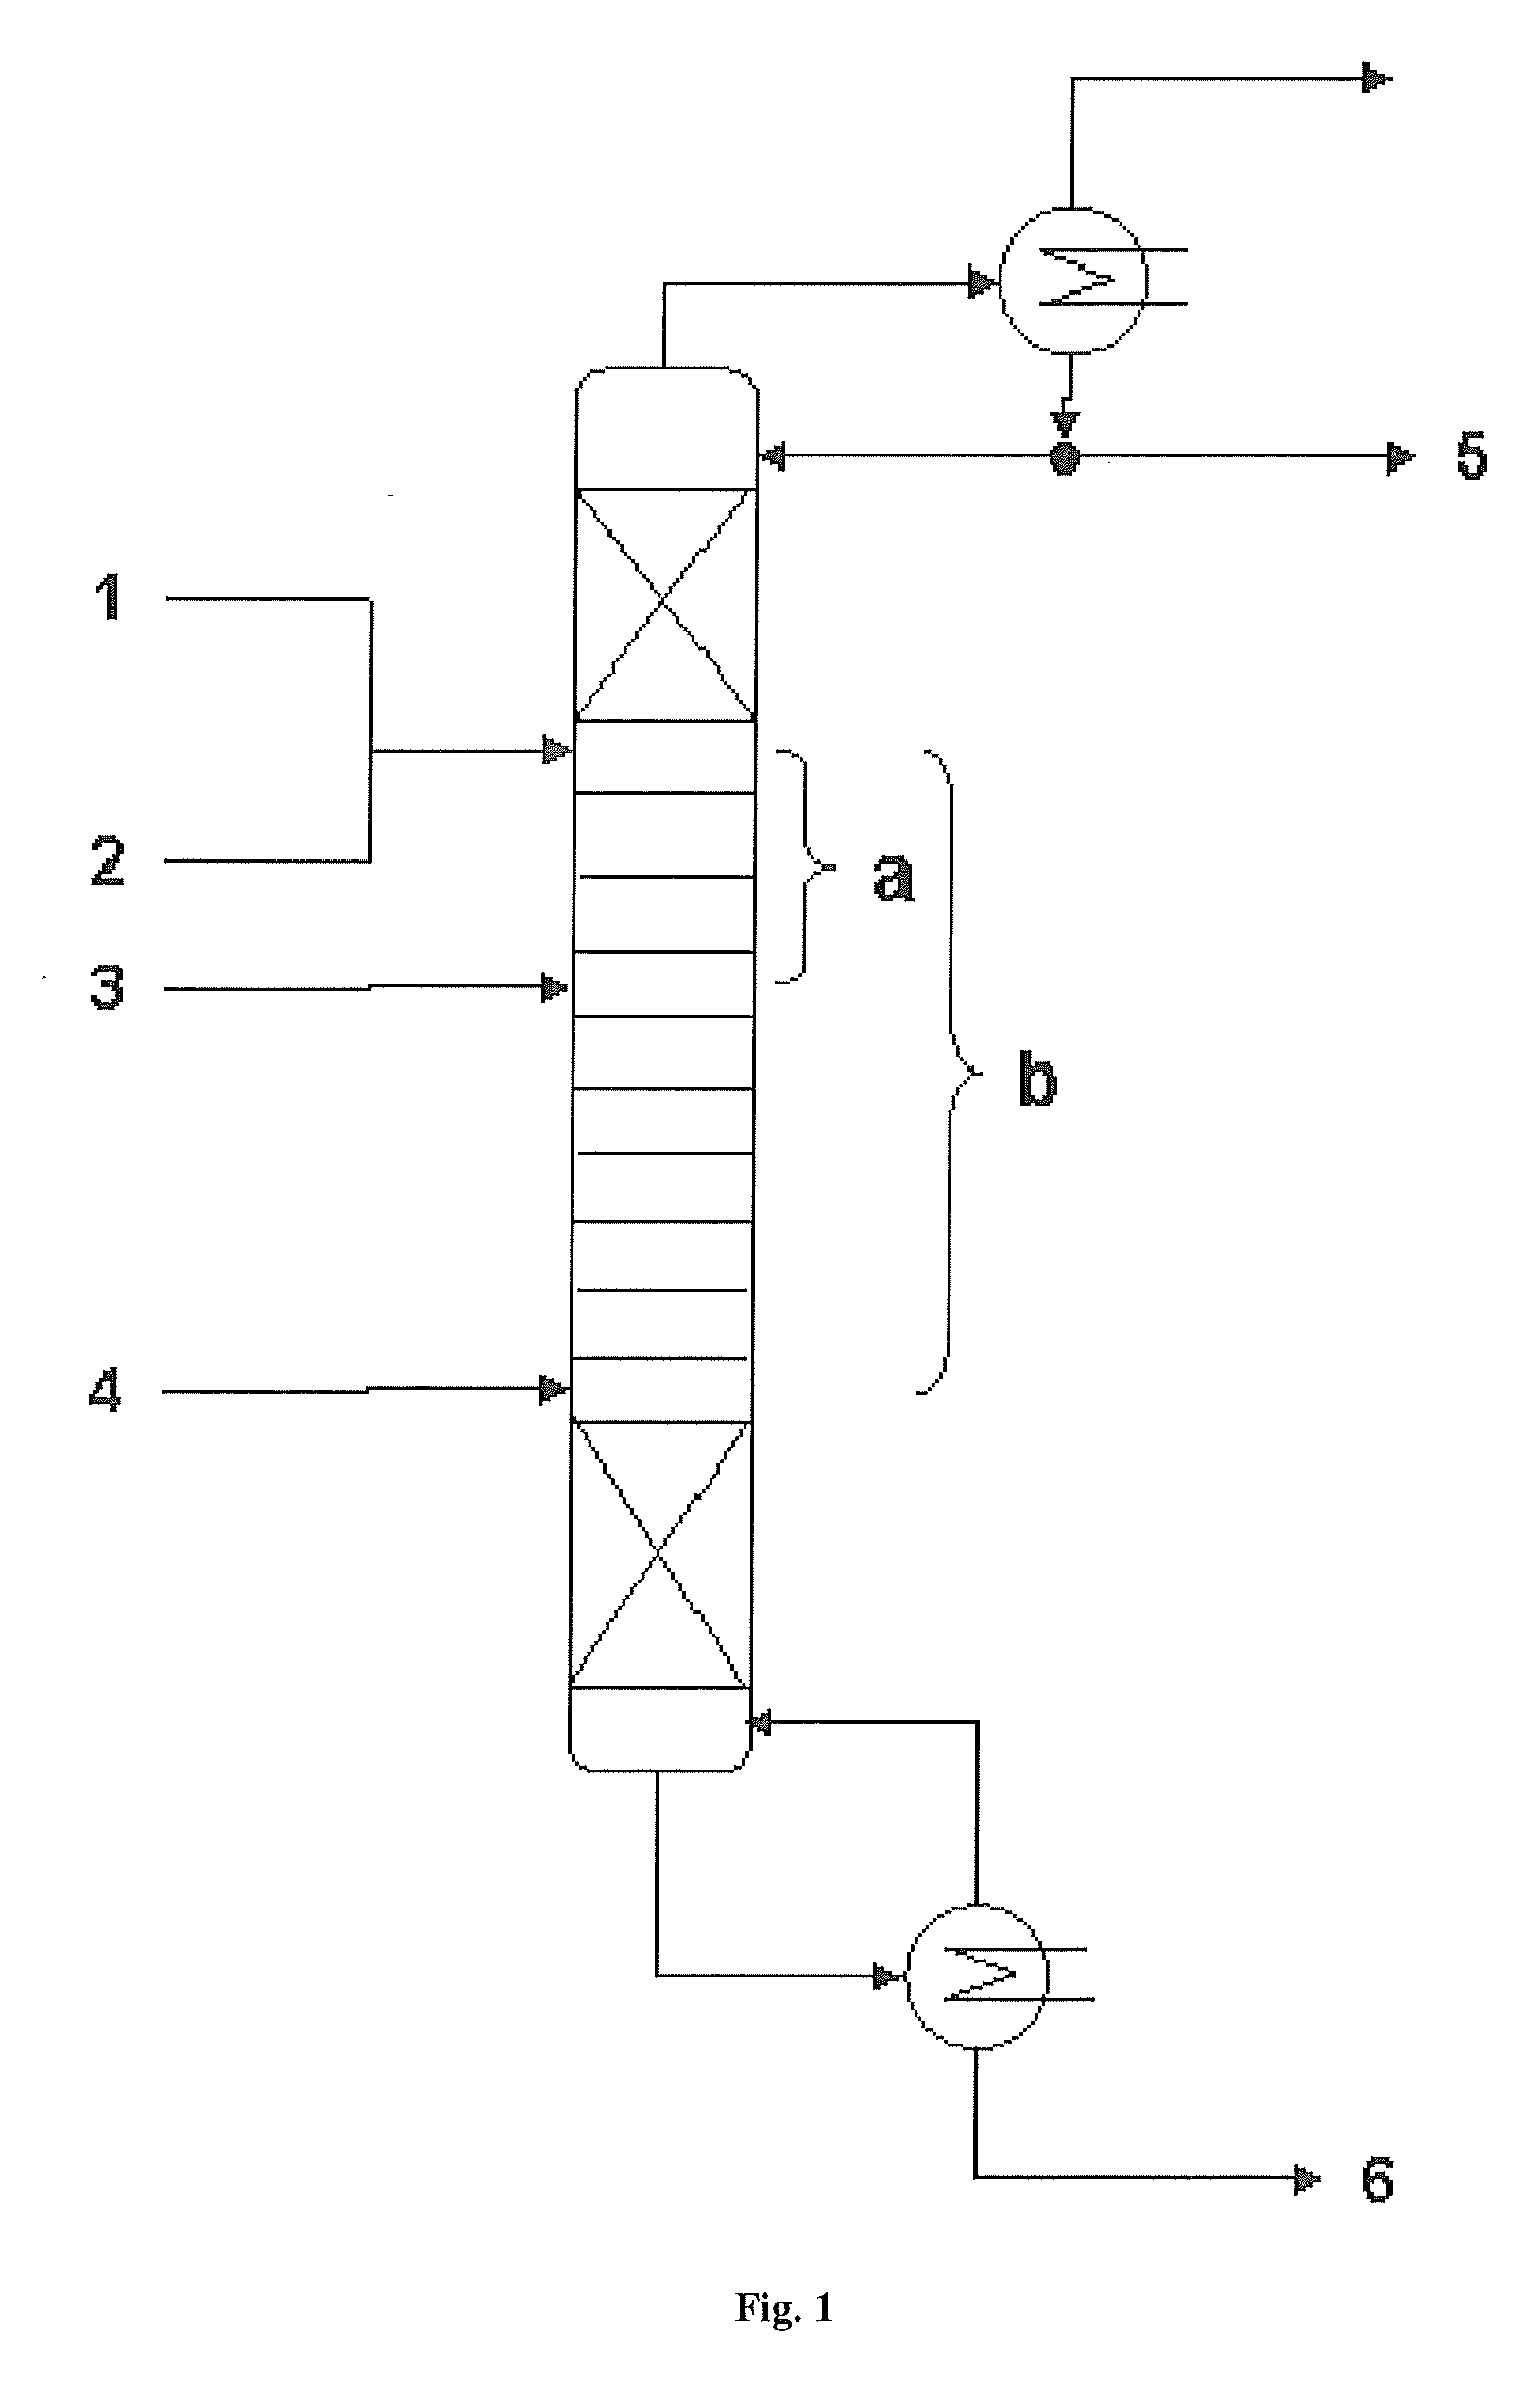 Process for preparing dialkyl carbonates from alkylene carbonates and alcohols